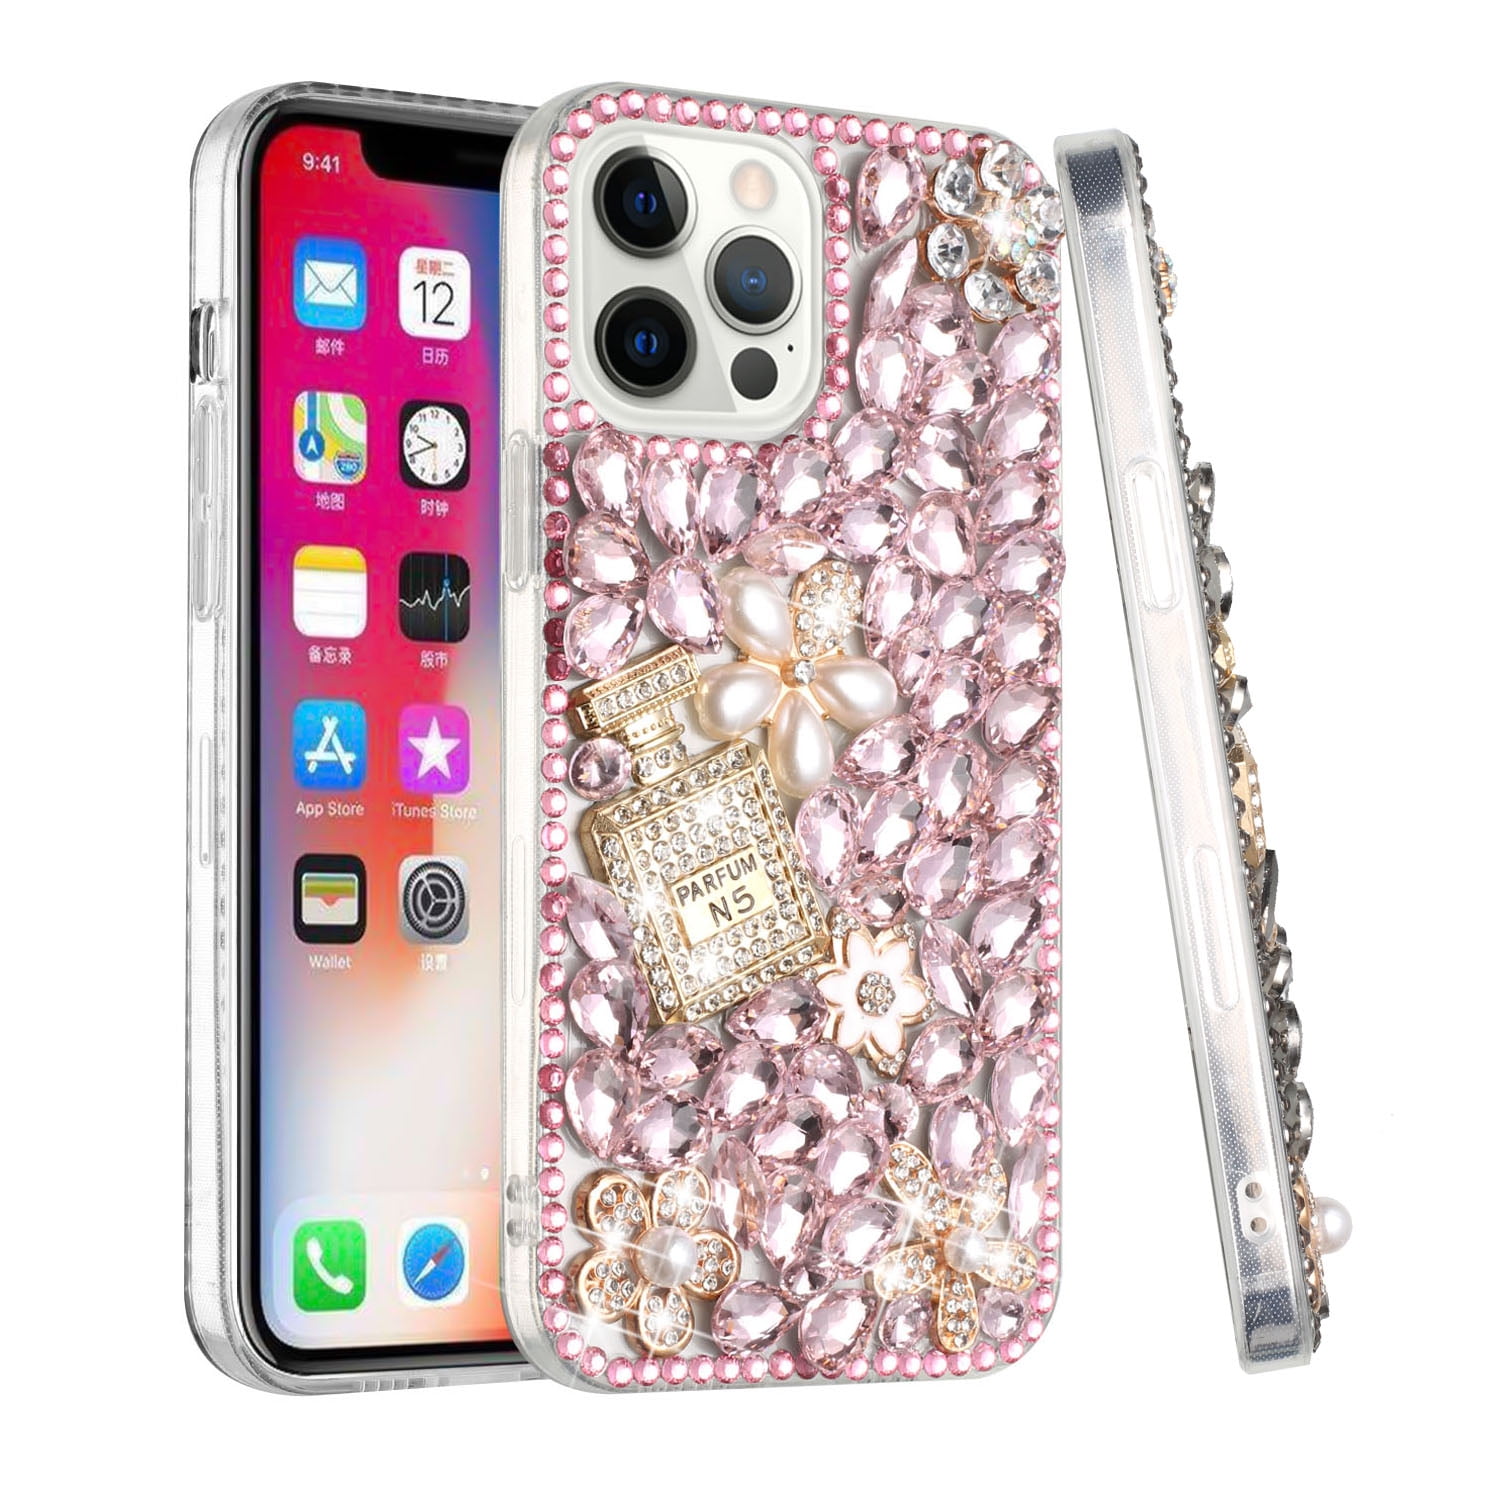 For Apple iPhone 8 Plus/7 Plus/6 6S Plus Bling Crystal 3D Full Diamonds  Luxury Sparkle Rhinestone Hybrid Cover ,Xpm Phone Case [ Pink Exquisite  Garden